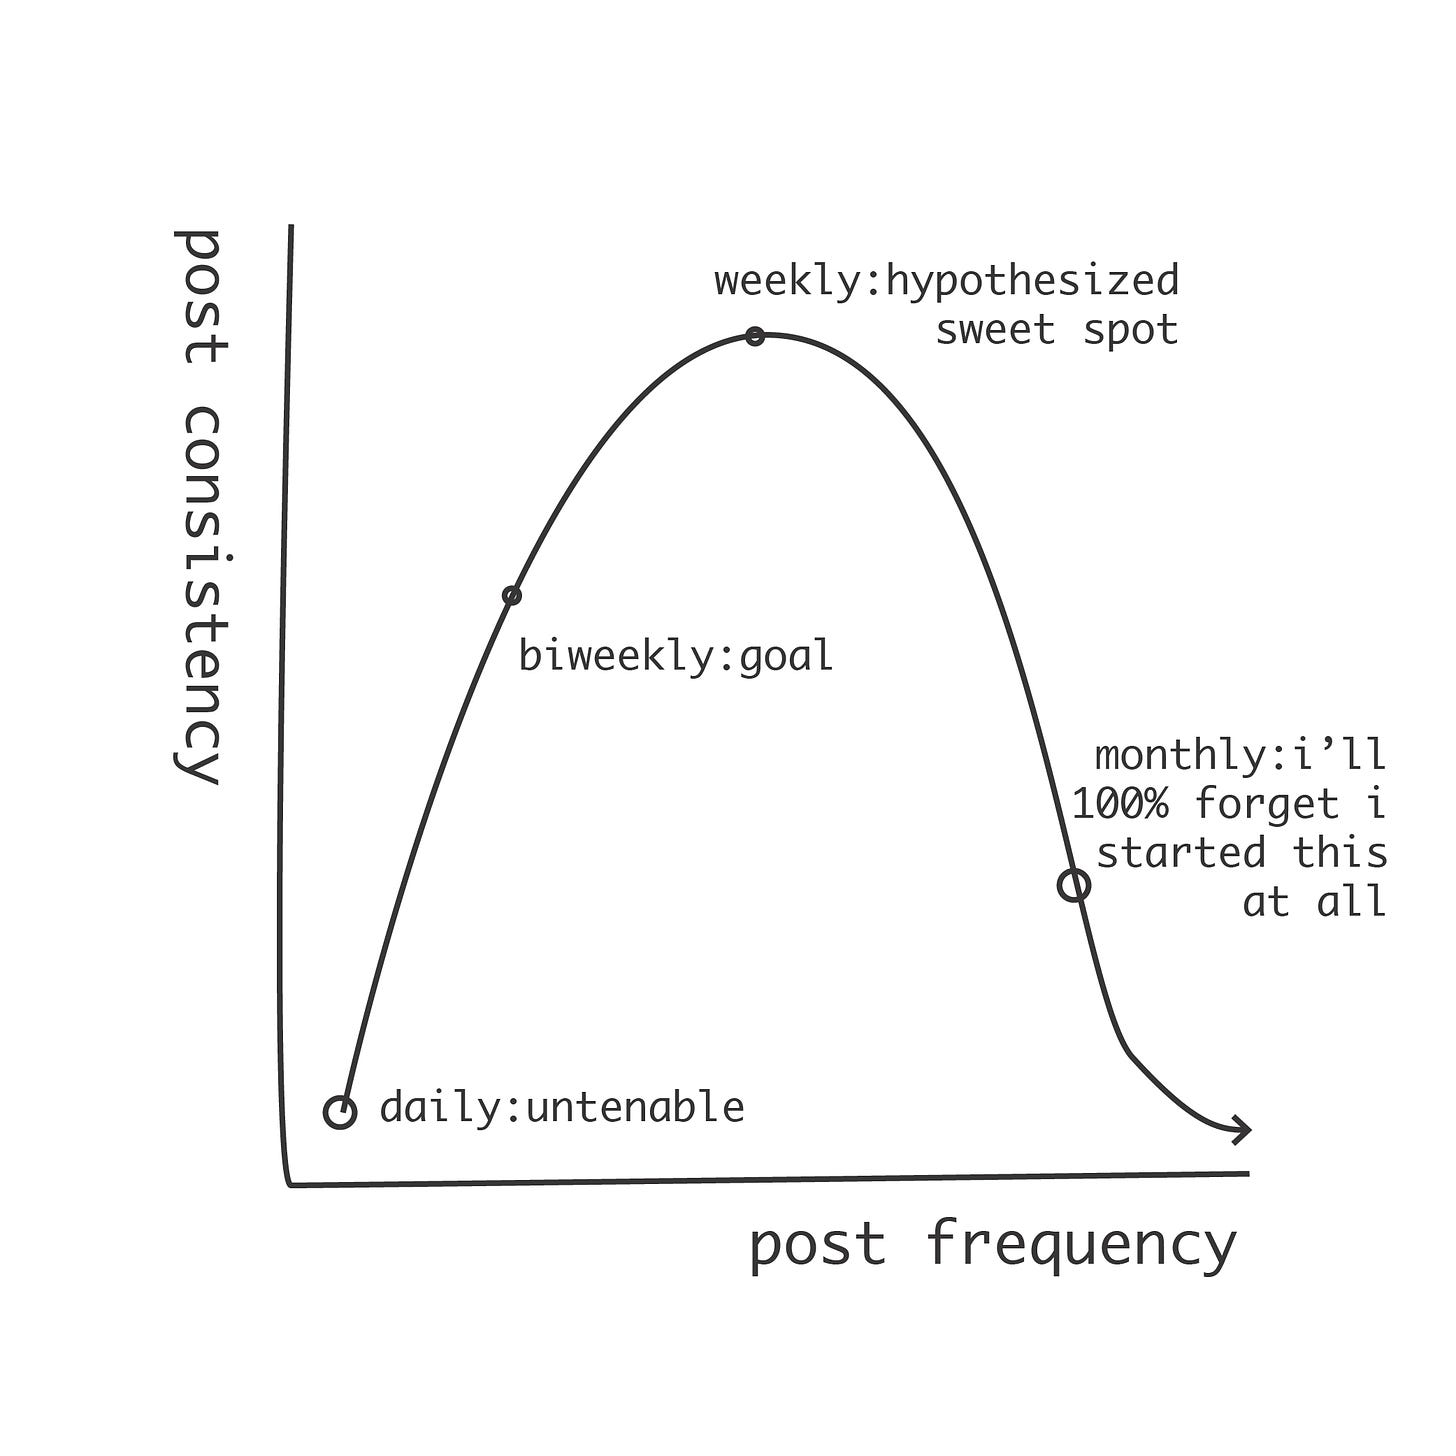 Caption: a graph of post-frequency and post-consistency shows a bell curve with “weekly: hypothesized sweet spot” at the top, and “daily:untenable” and “monthly:i’ll forget” on either low end of the curve.